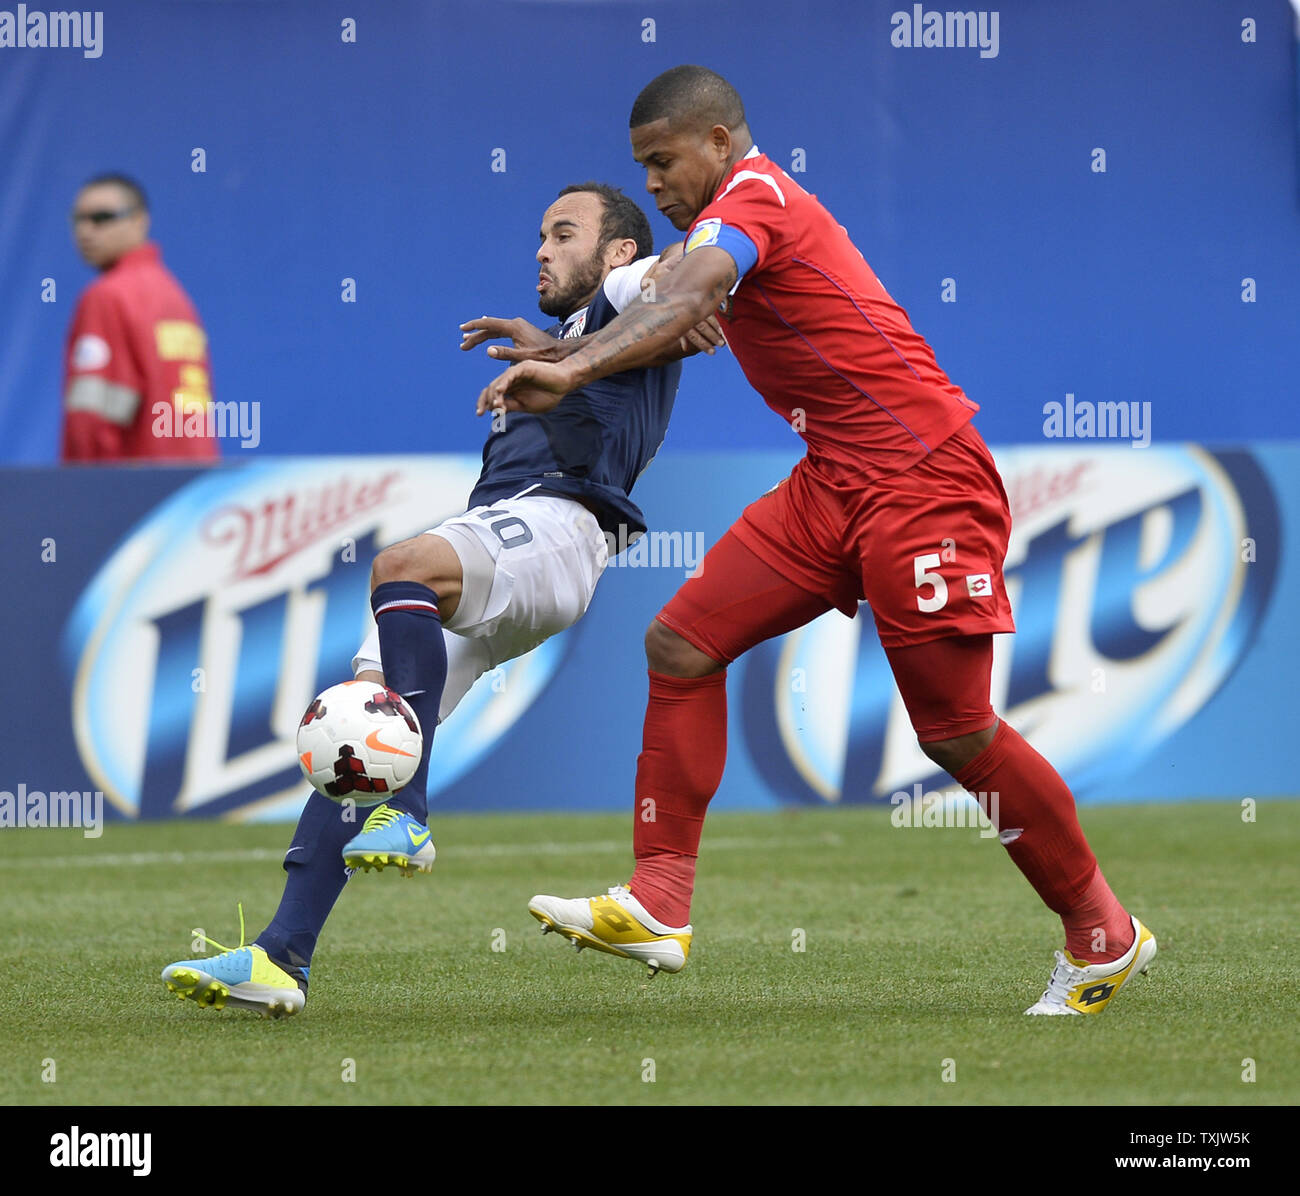 Panama defender Roman Torres (R) takse down United States forward Landon Donovan during the second half of the 2013 CONCACAF Gold Cup Final at Soldier Field in Chicago on July 28, 2013. The United States won 1-0.     UPI/Brian Kersey Stock Photo